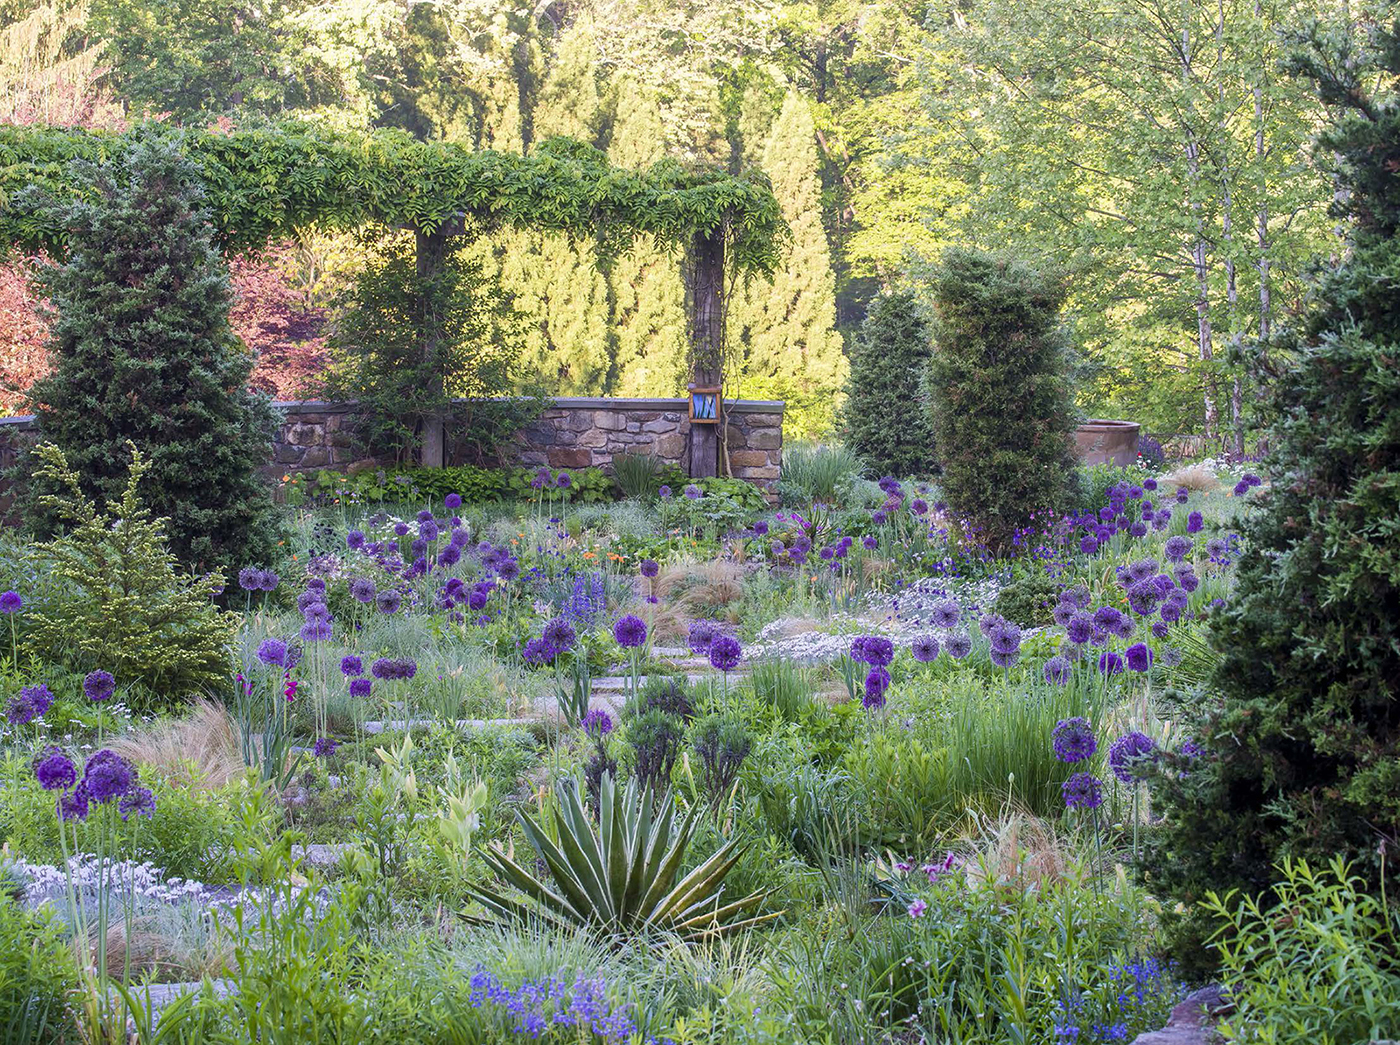 The Gravel Garden rolls into late spring with the last hurrah of bulbs - photo 2